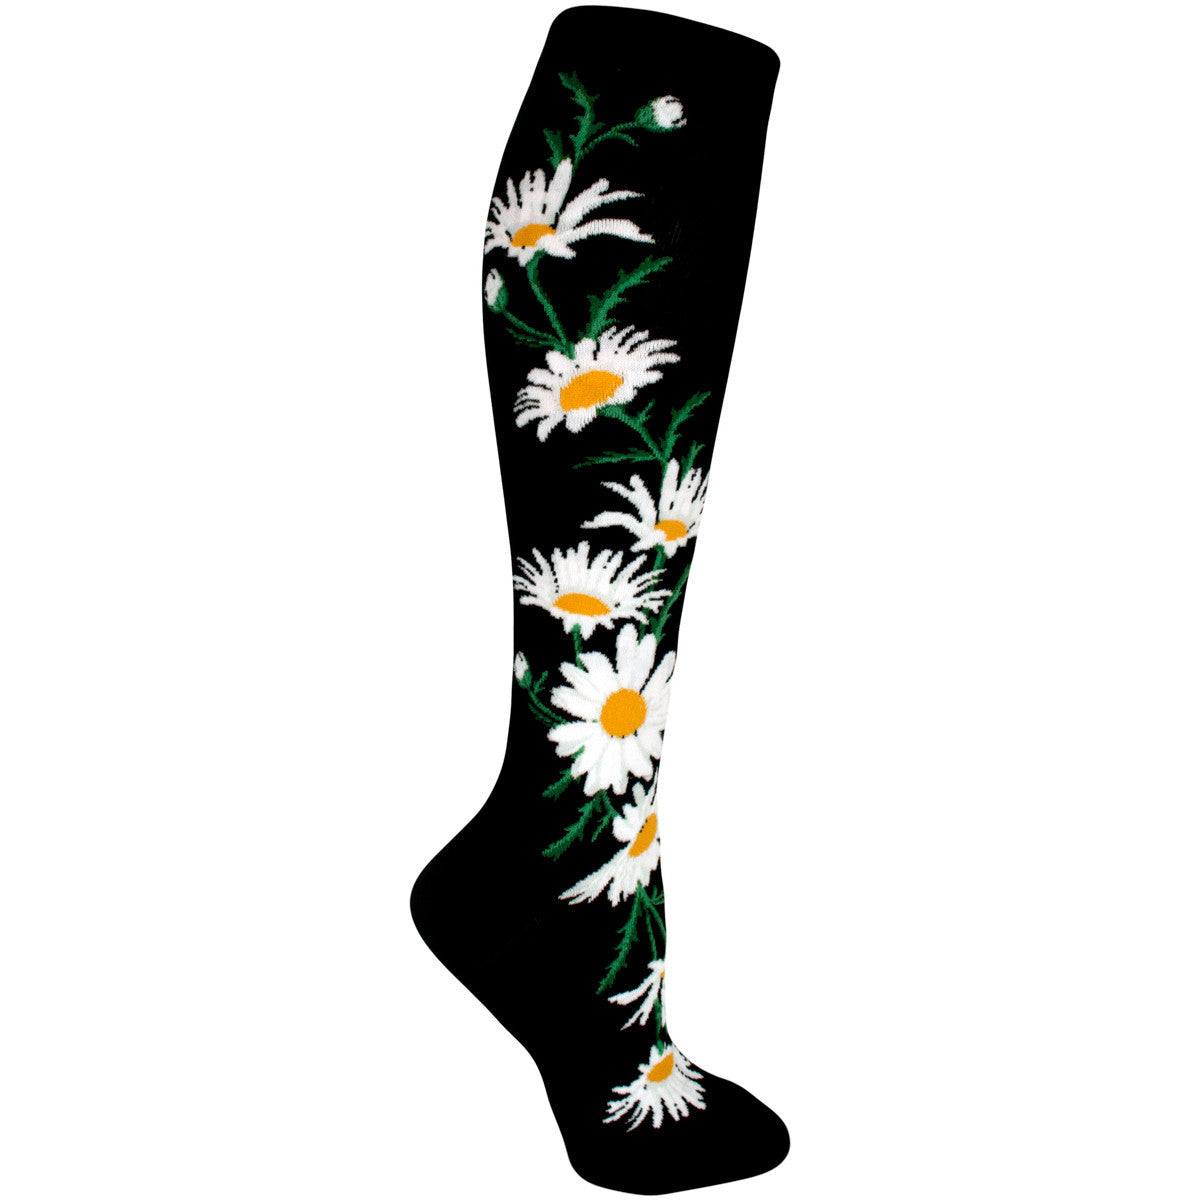 Women's Crazy For Daisies Knee High (Black)